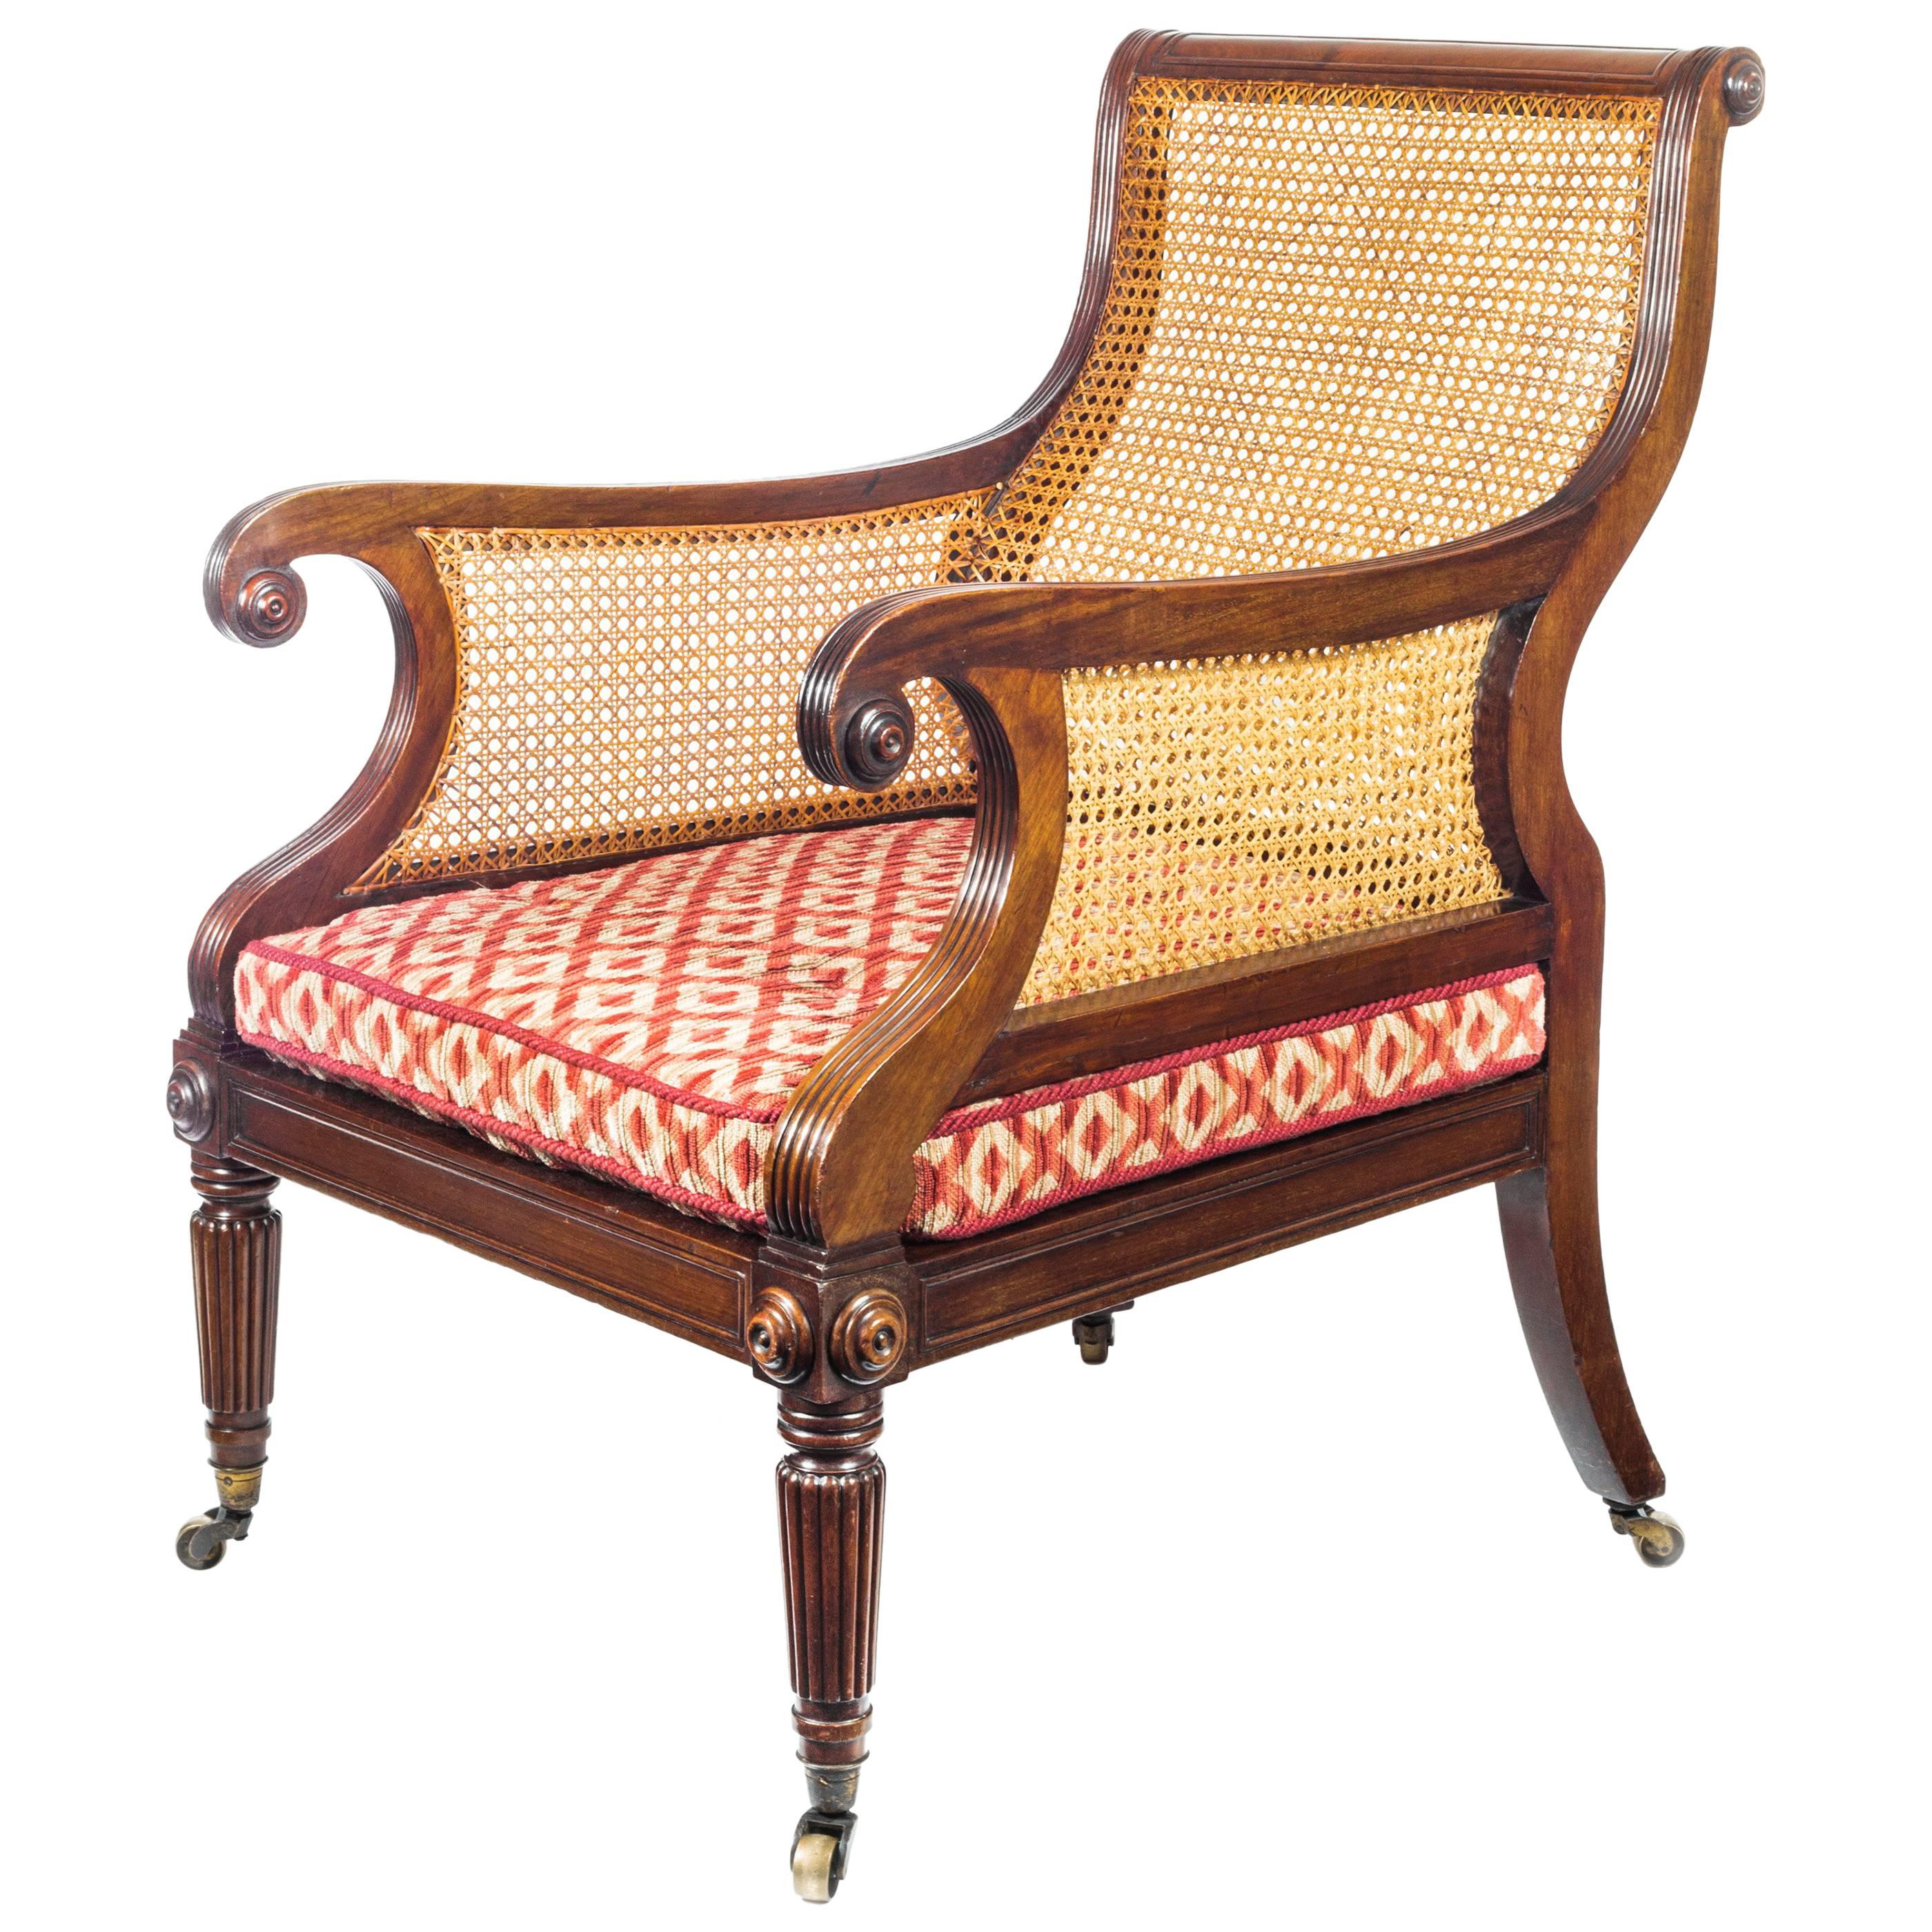 English Regency Mahogany Library Bergère Armchair Attributed to Gillows